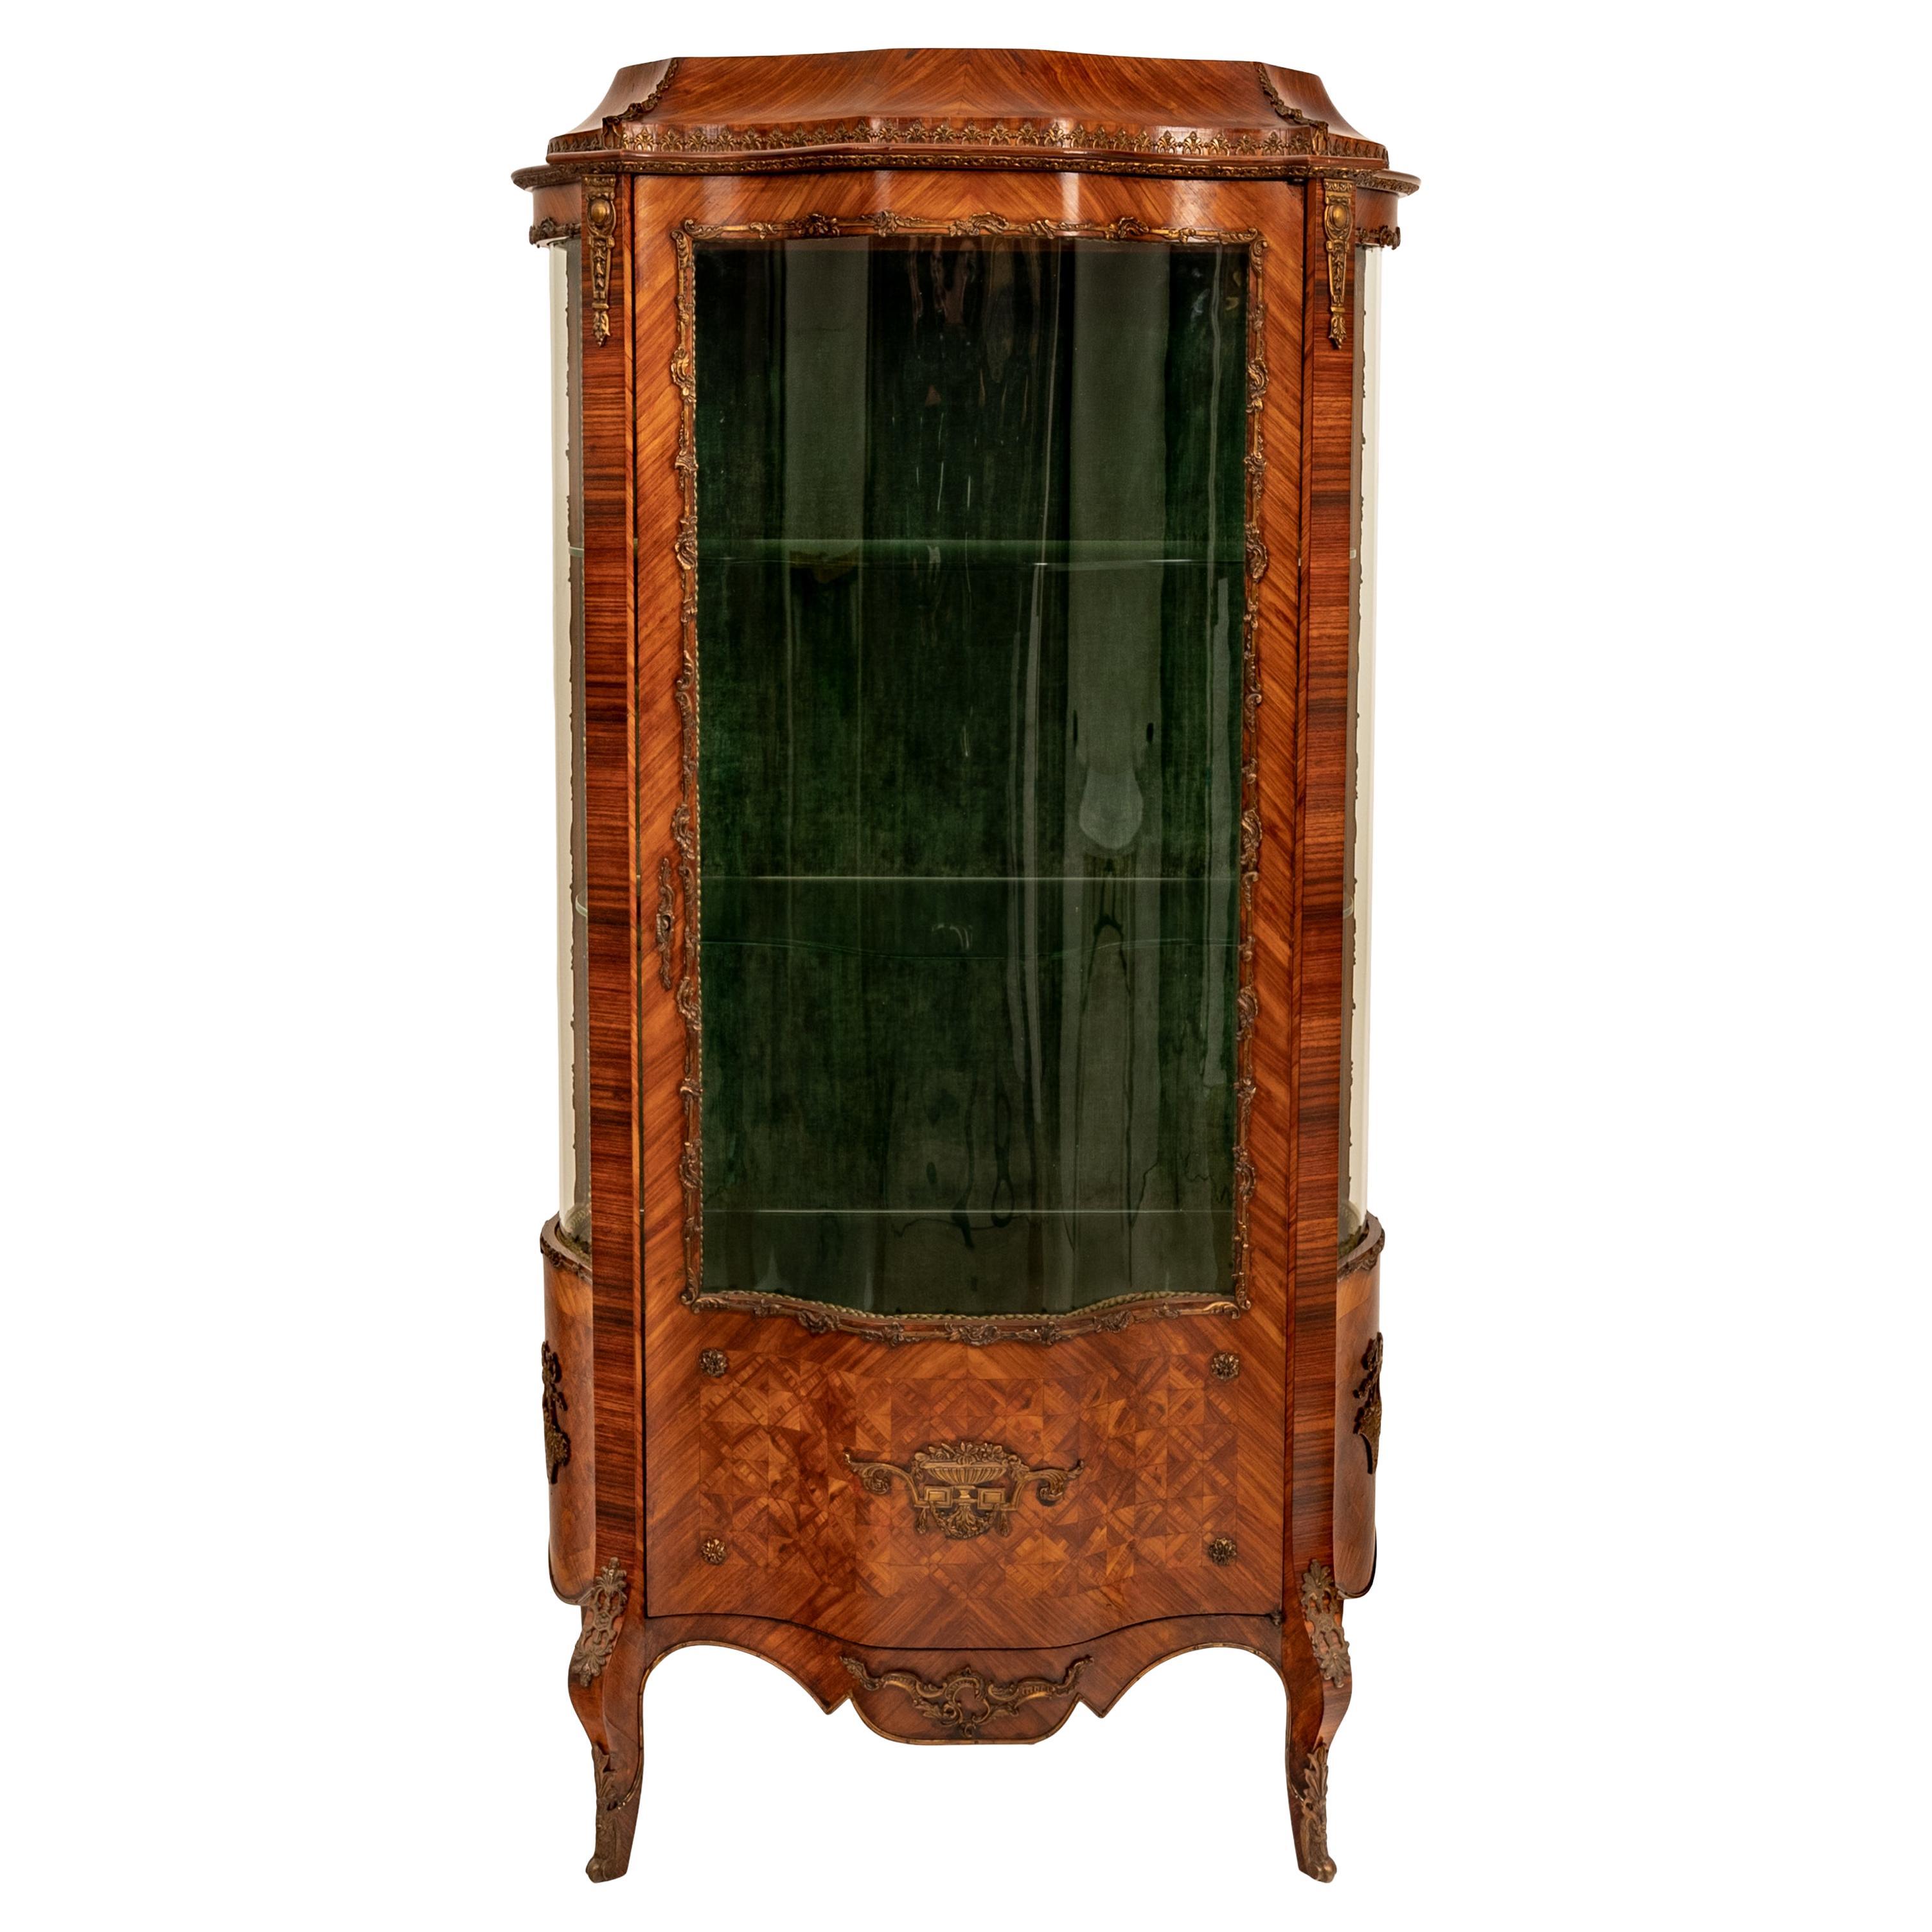 Fine Antique French Louis XV Kingwood Ormolu Bombe Shaped Marquetry Vitrine 1880 For Sale